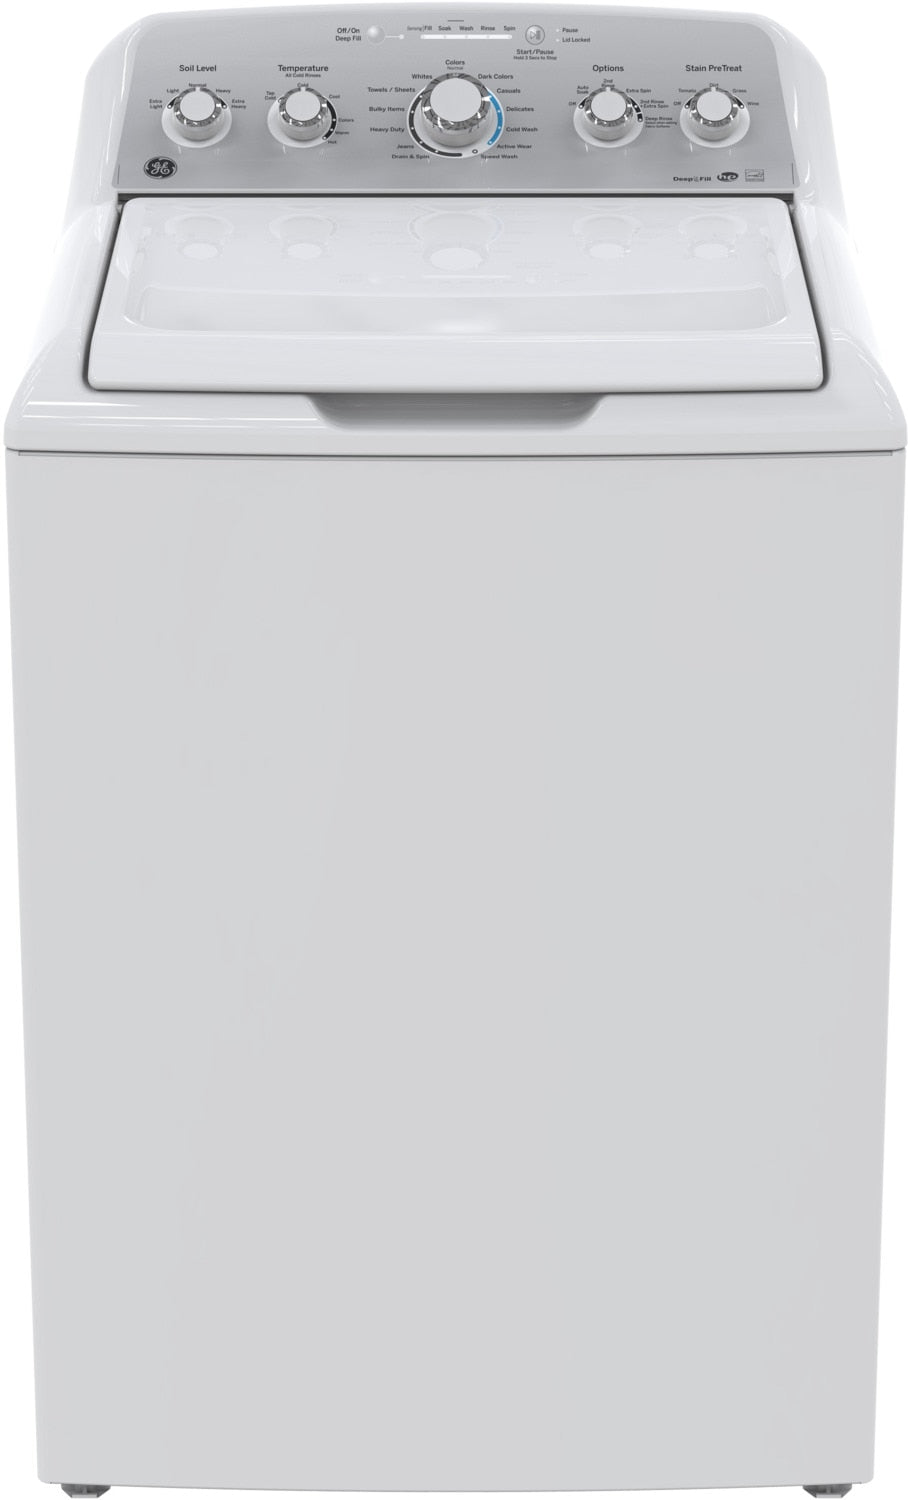 GE White Top-Load Washer (4.9 Cu. Ft.) - GTW485BMMWS